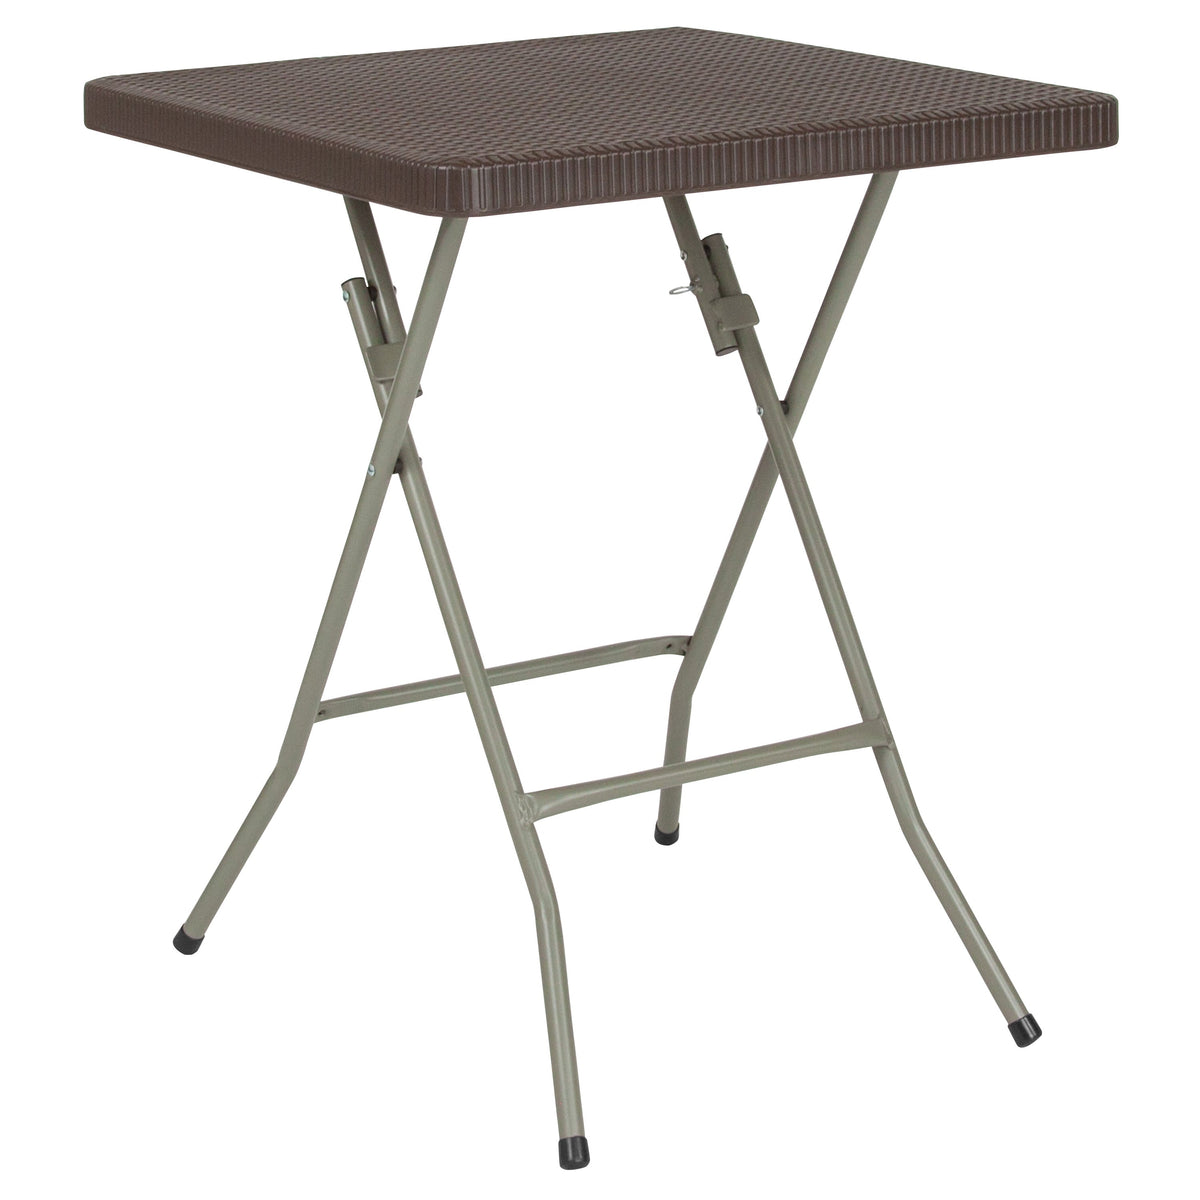 1.95-Foot Square Brown Rattan Plastic Folding Table - Outdoor Event Table